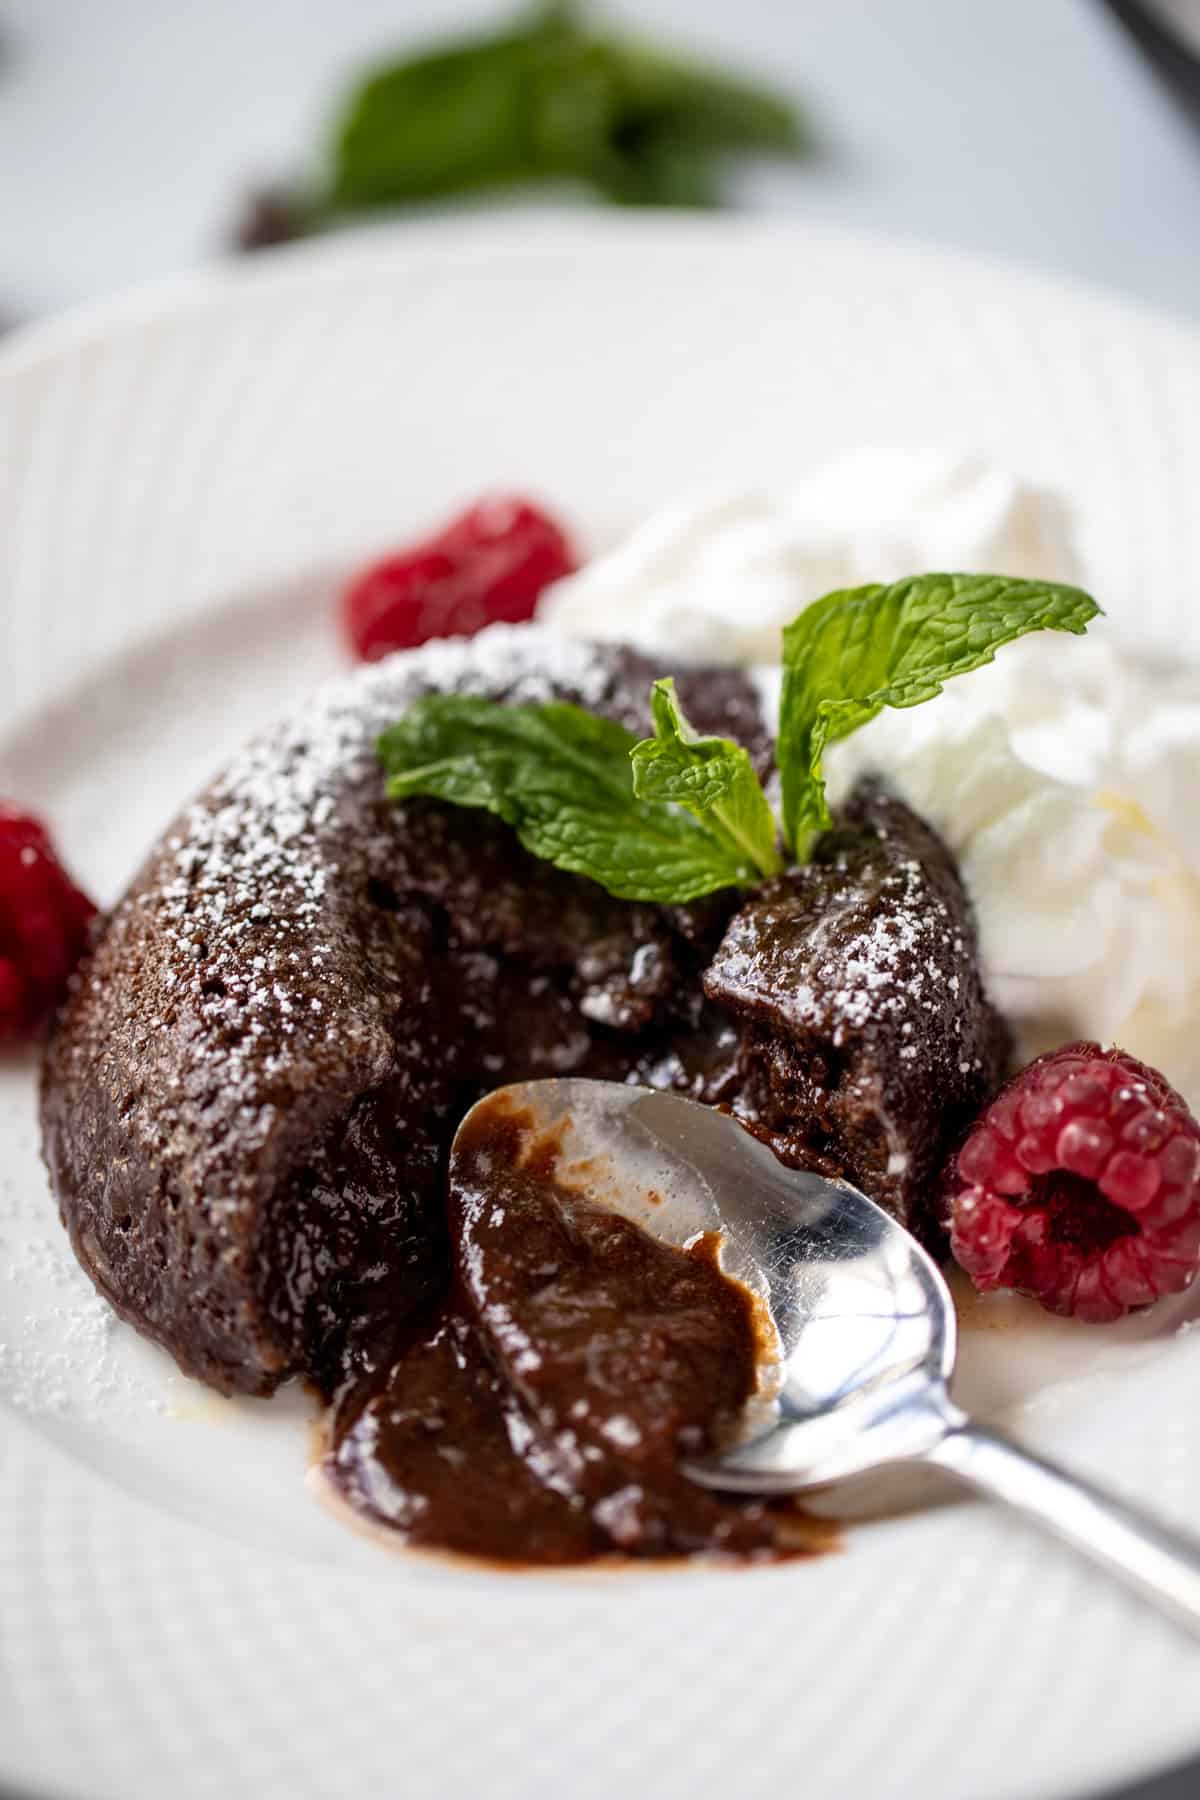 Chocolate lava cake on white plate with spoon cutting into it to show chocolate ooze. 